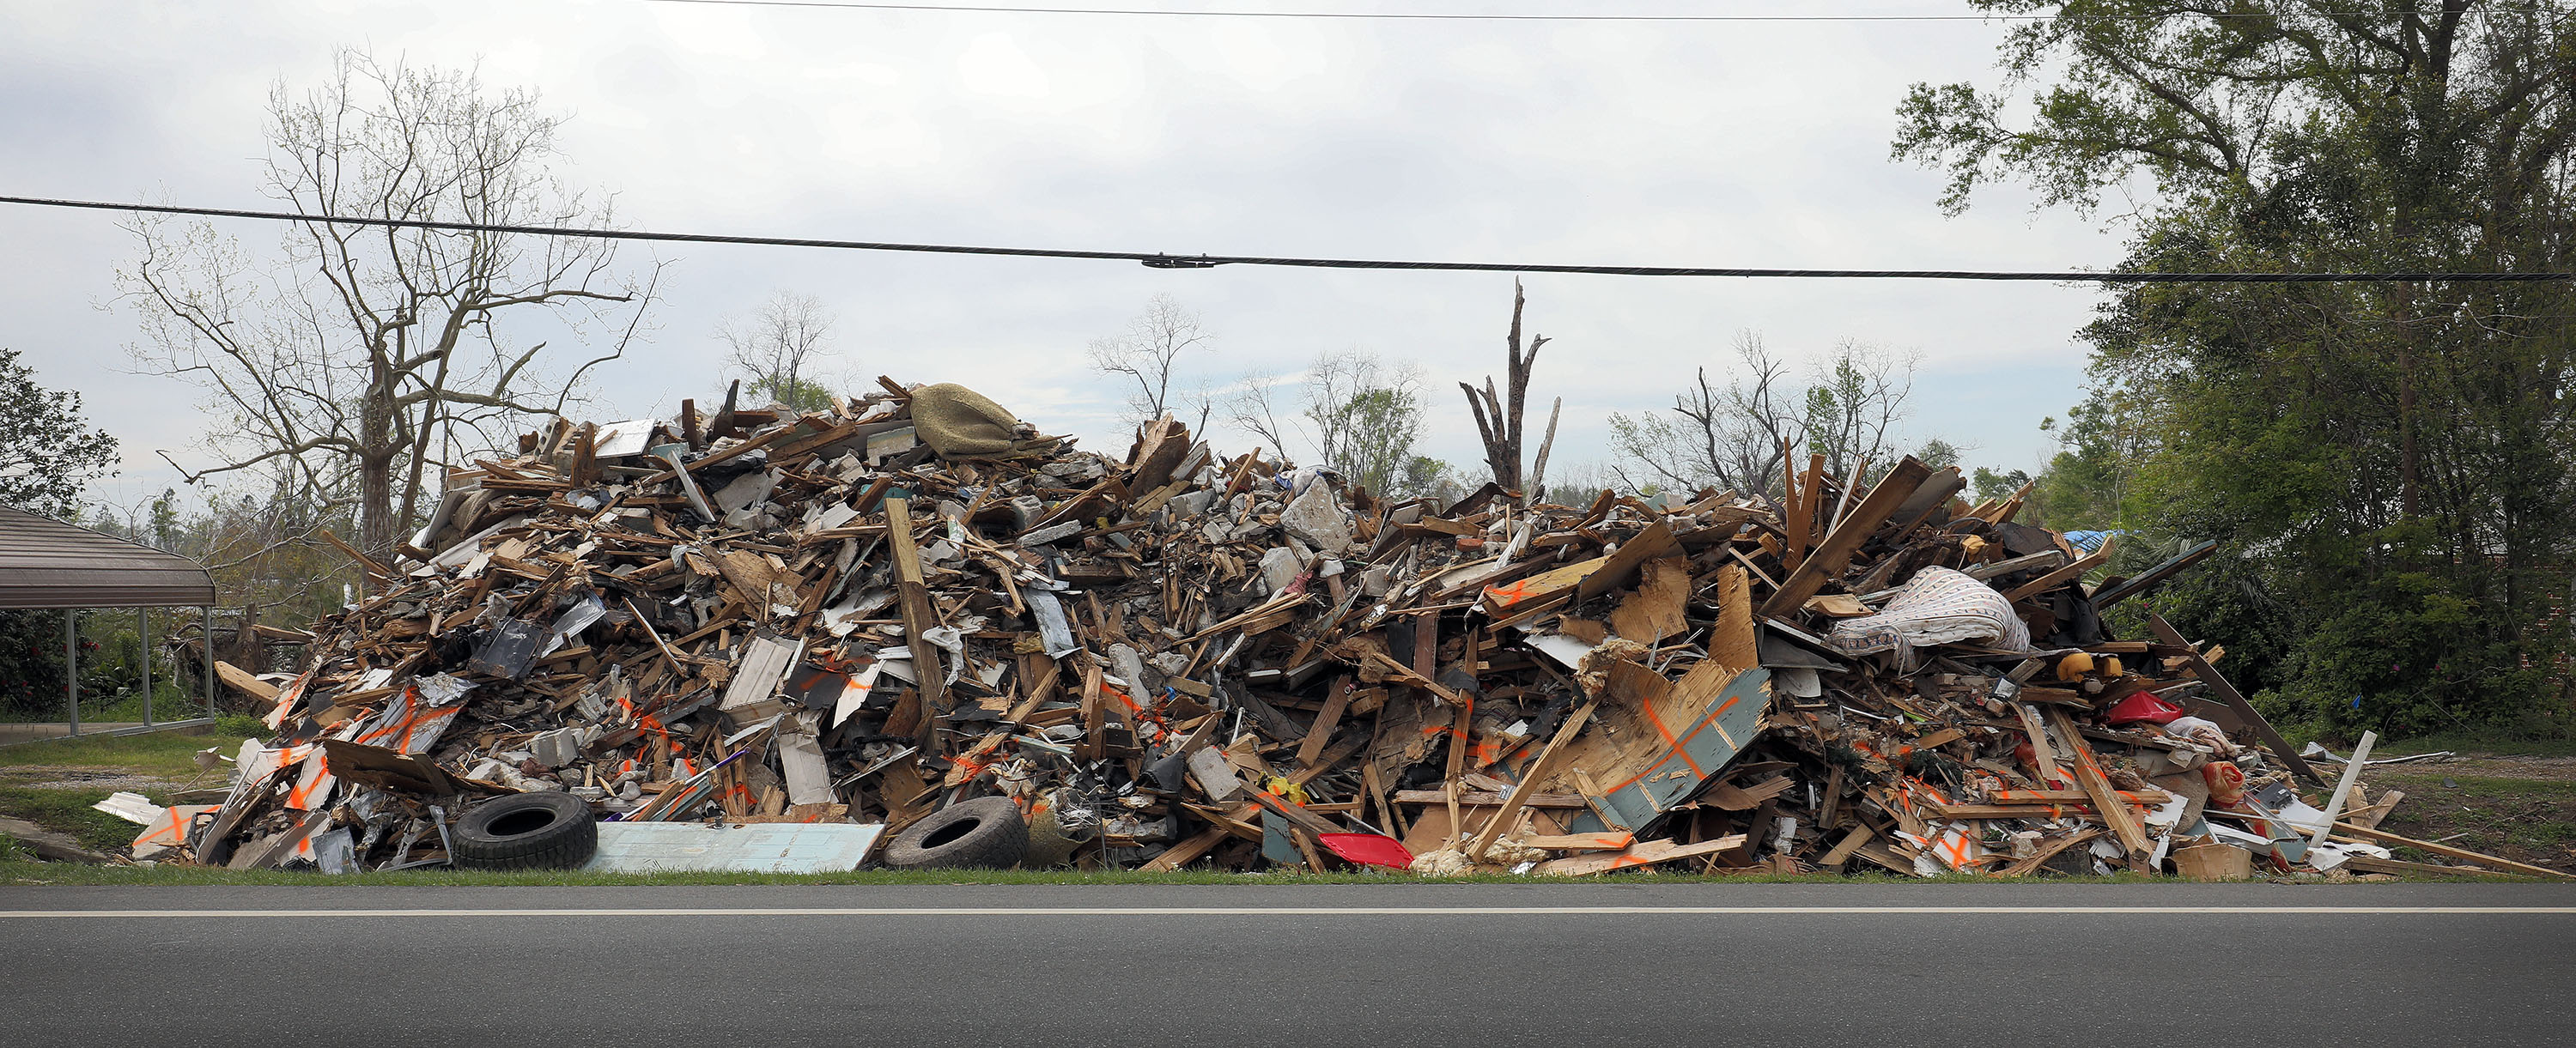 hurricane disaster debris on the side of the road